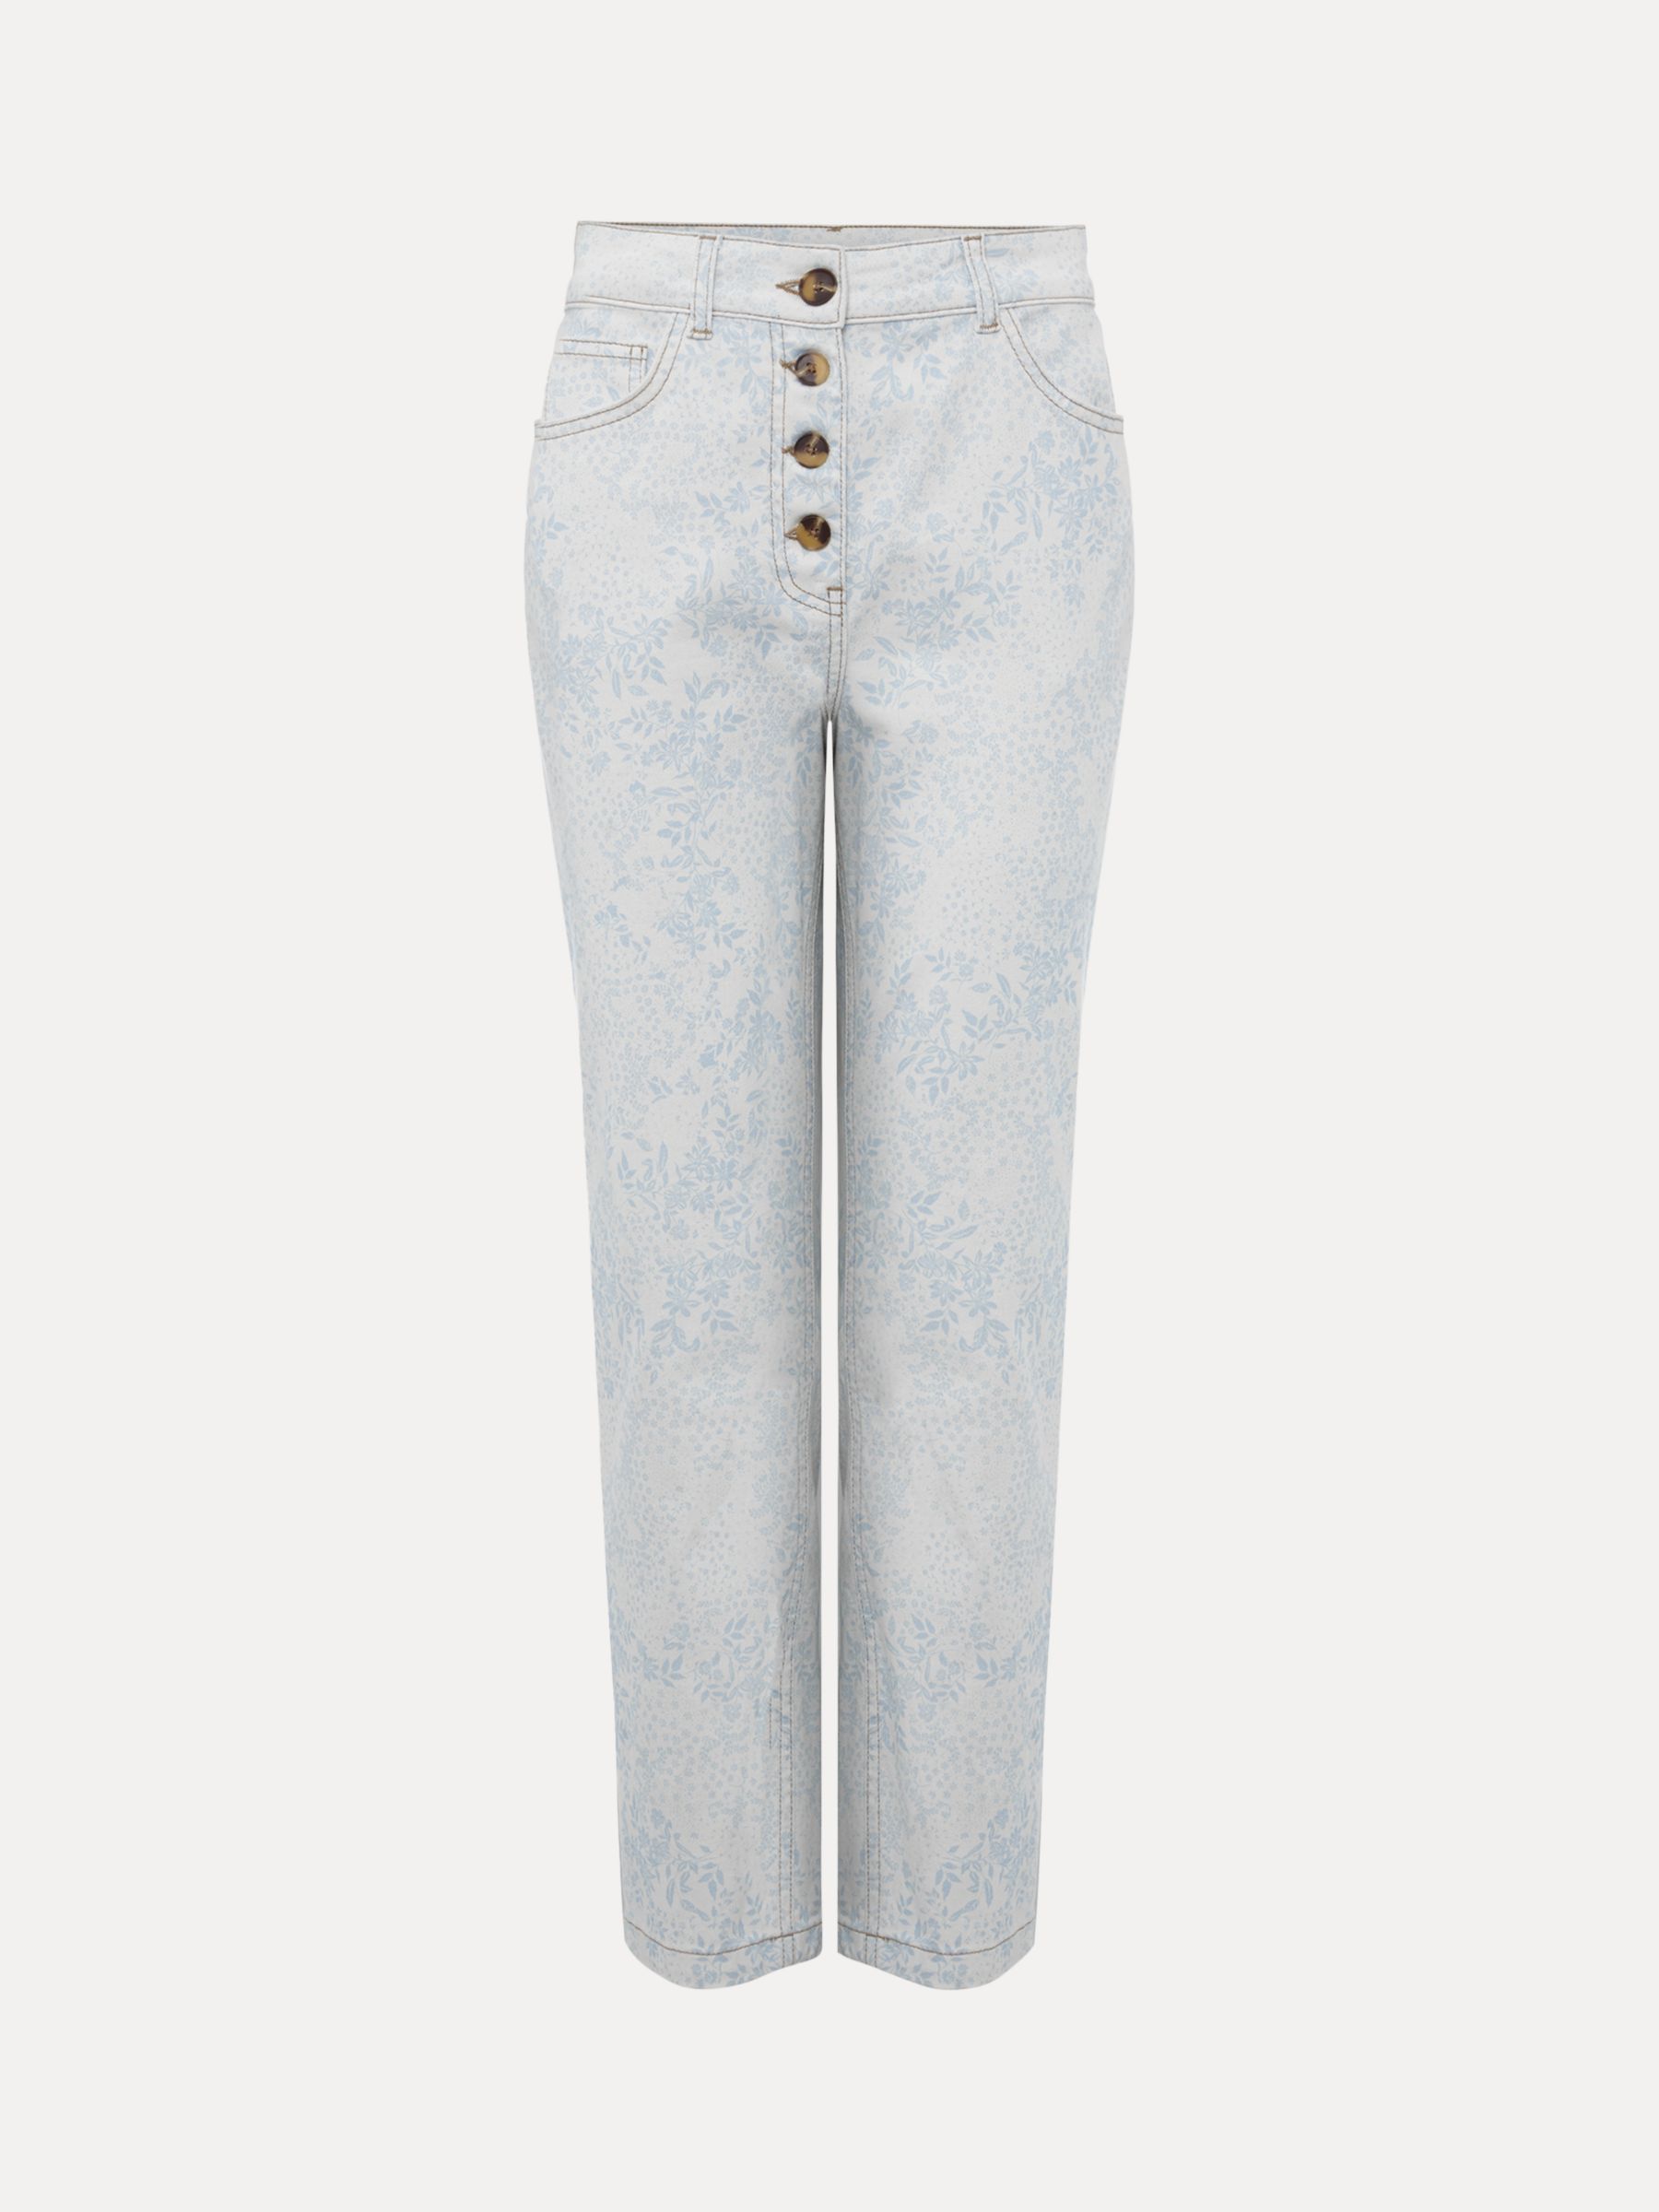 Phase Eight Cordelia Floral Print Jeans, Ivory/Blue, 8